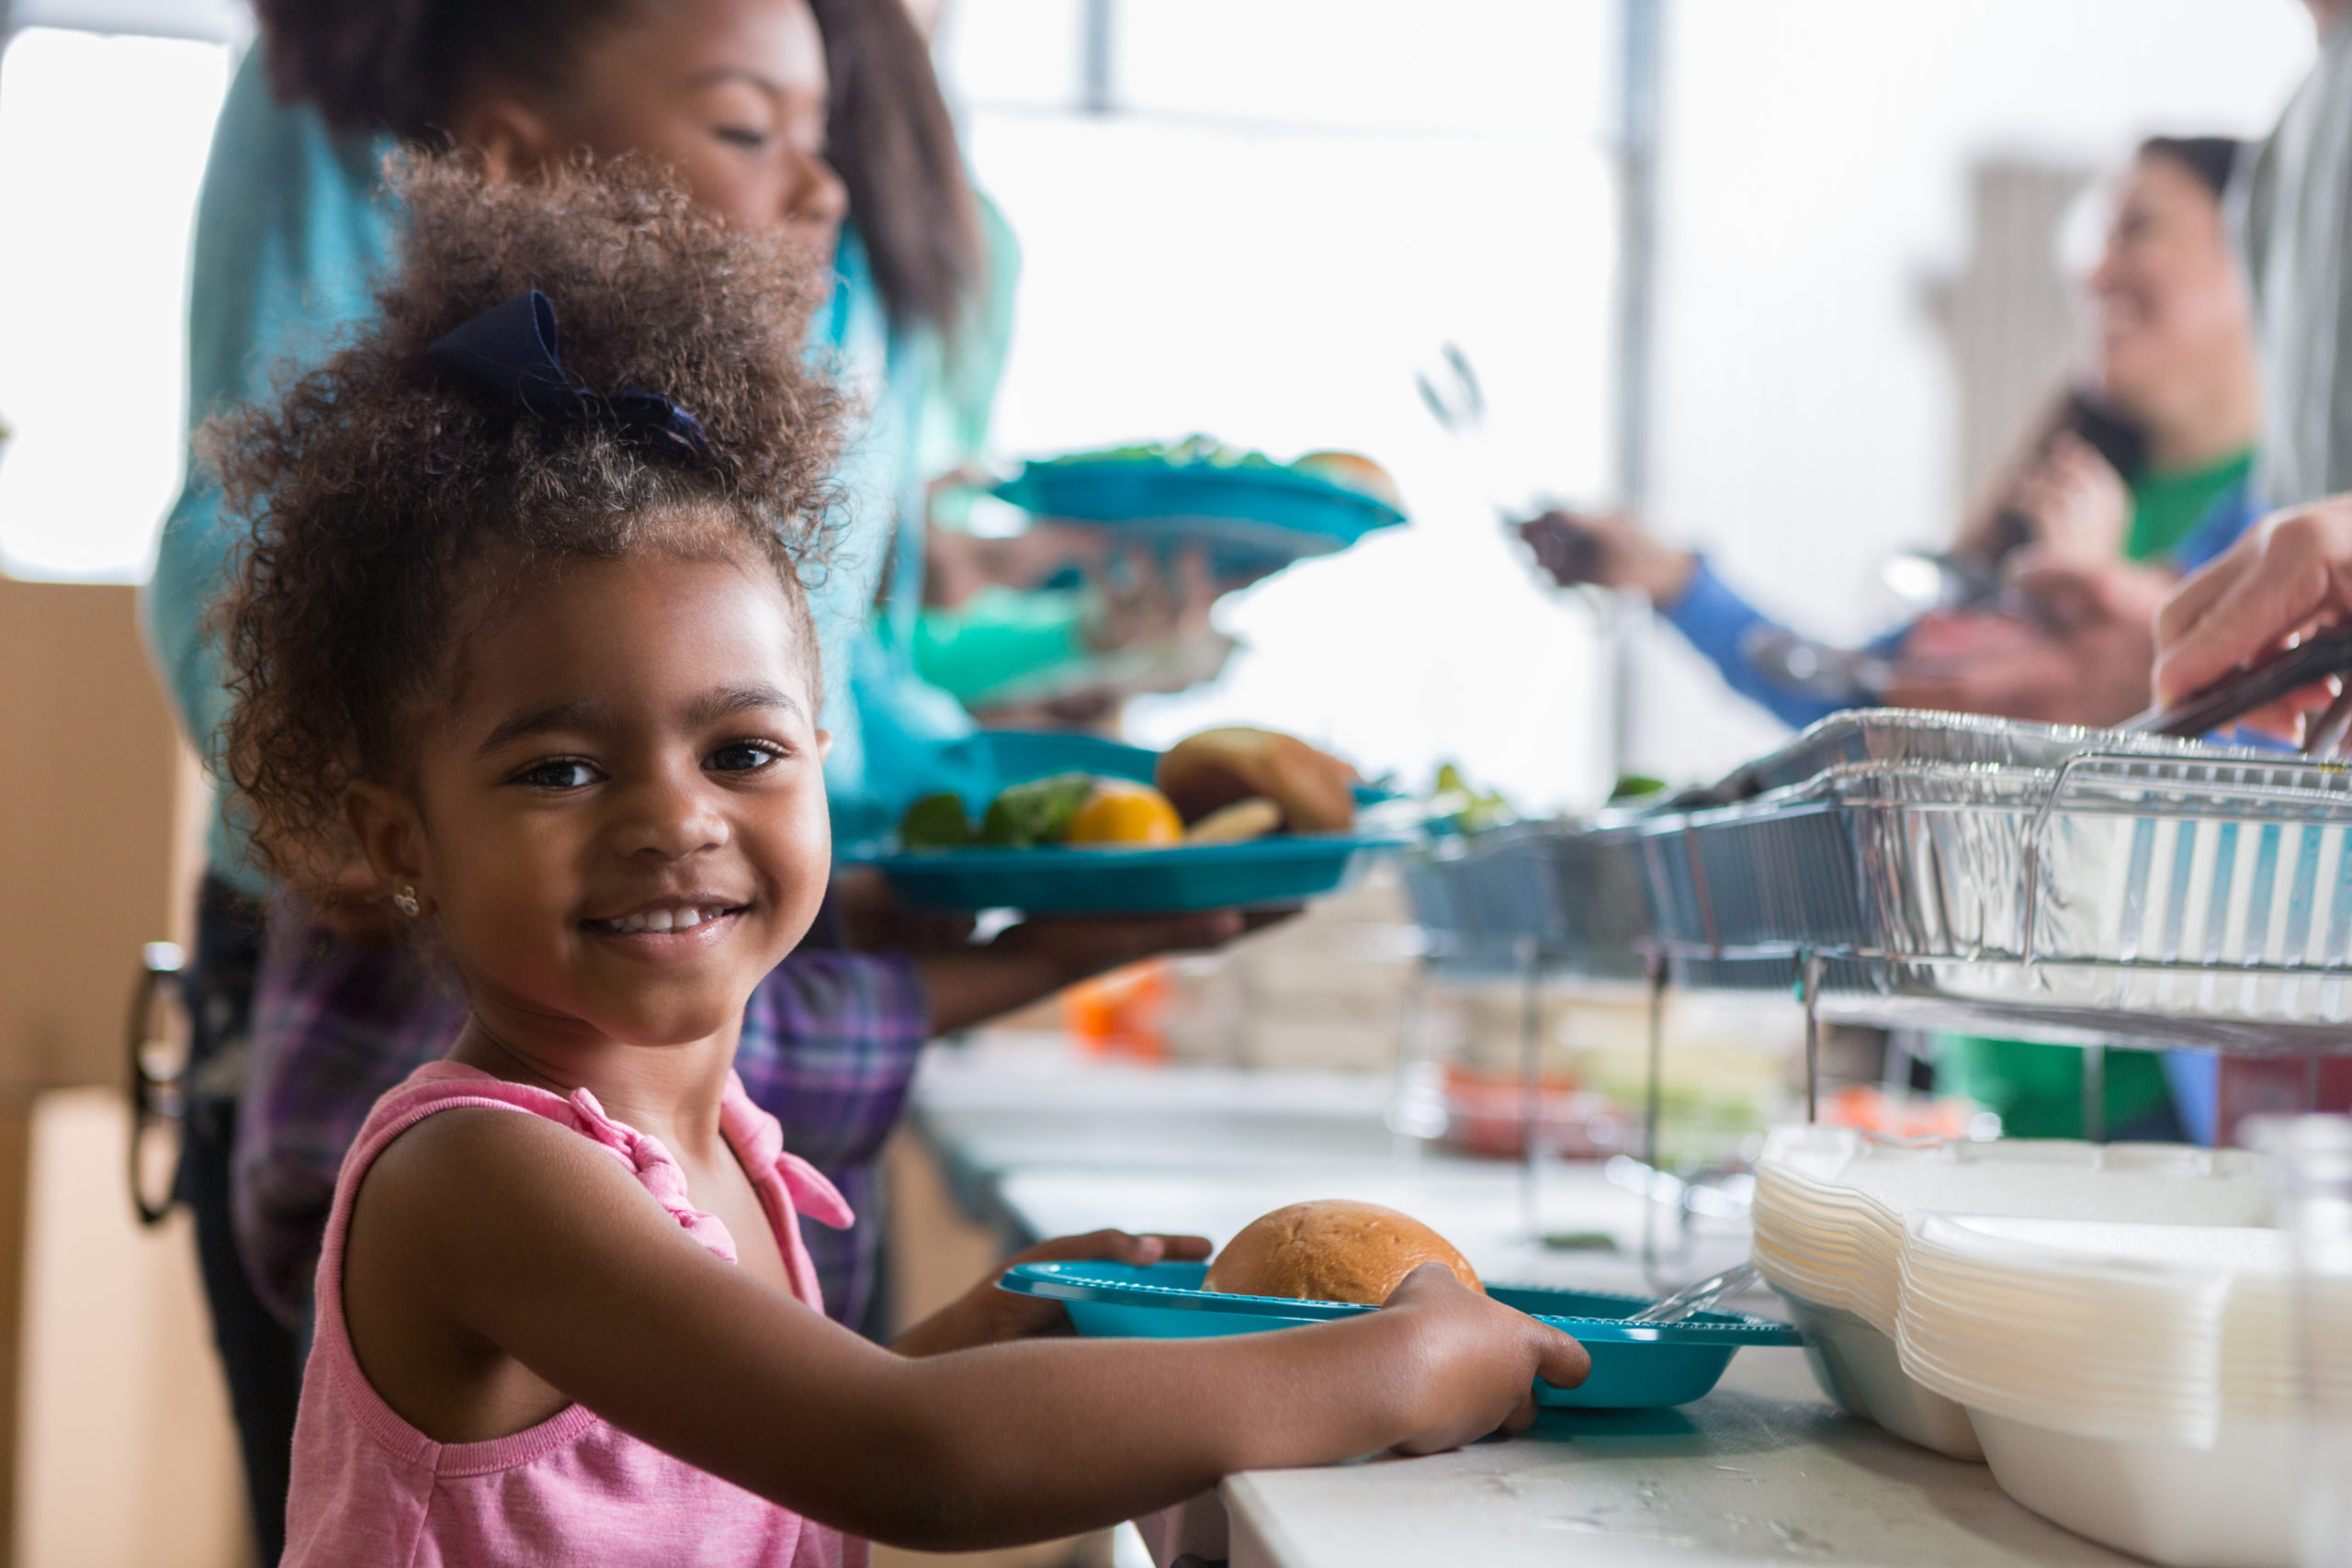 Cheerful Black little girls smiles while in line in a soup kitchen. She is holding a plate full of healthy food. Her family is in line behind her.